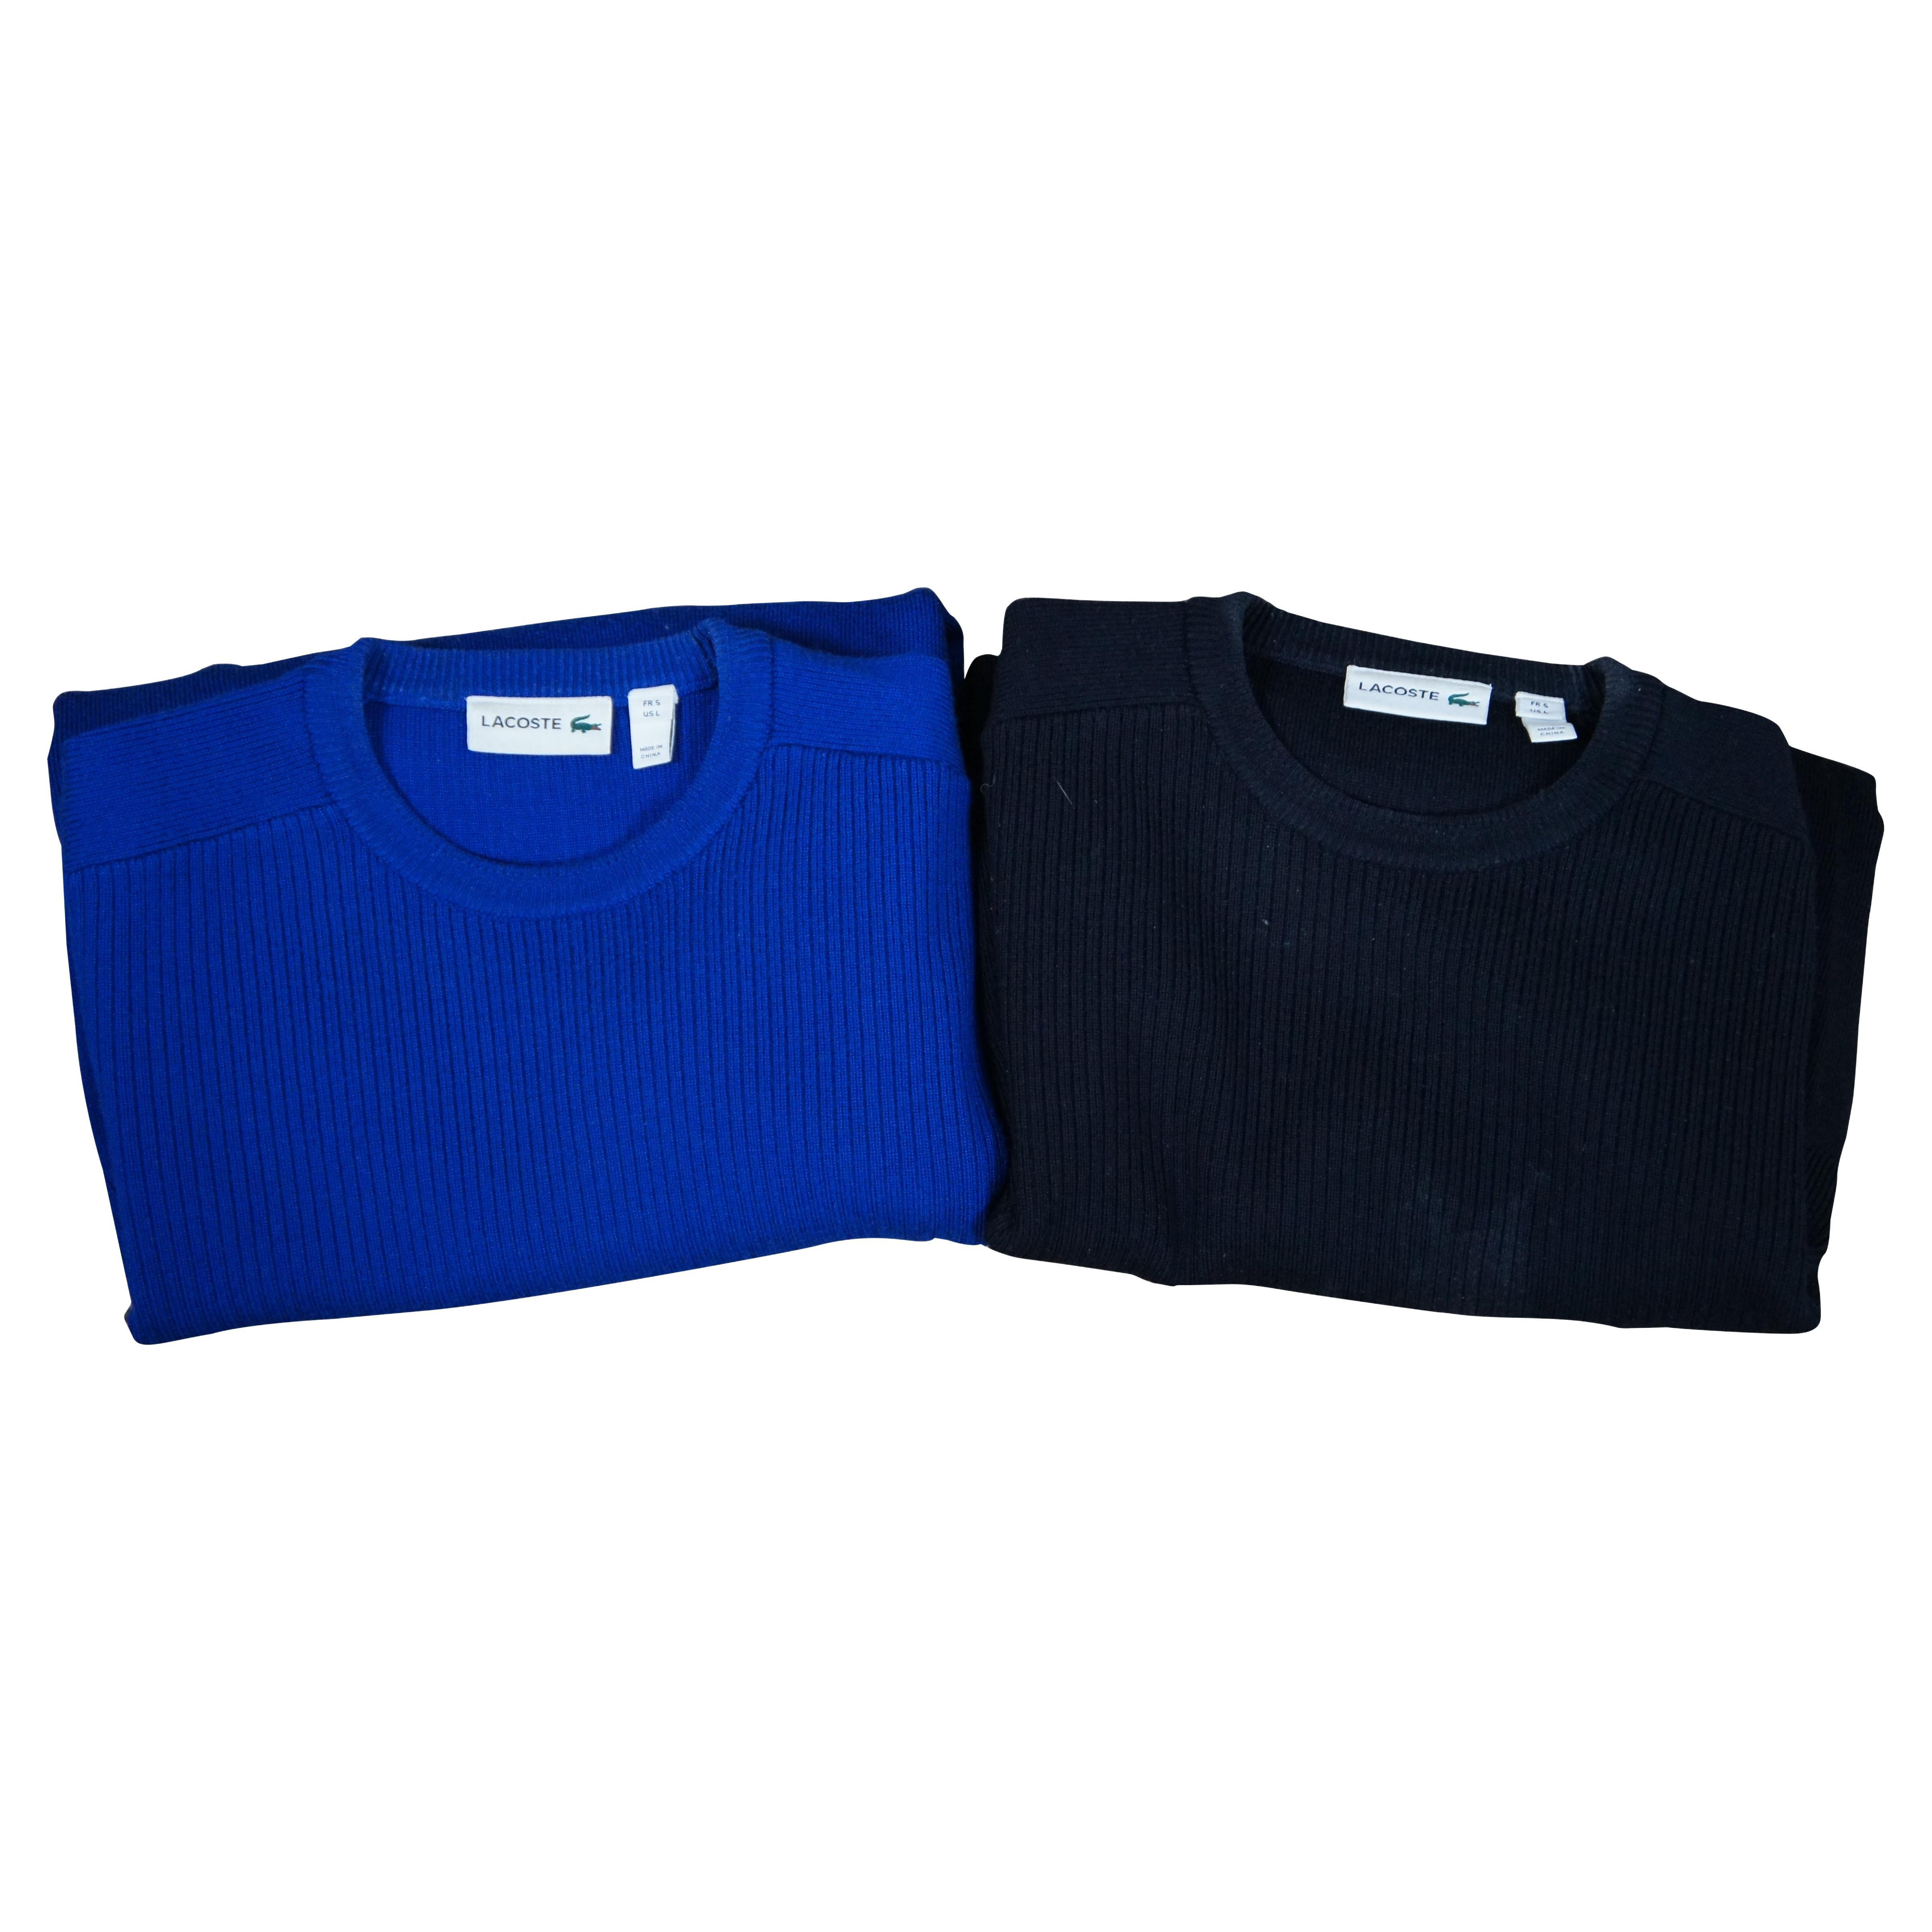 2 Lacoste Sports D'Hiver Pull Over Sweaters Black Blue Mens 5 L